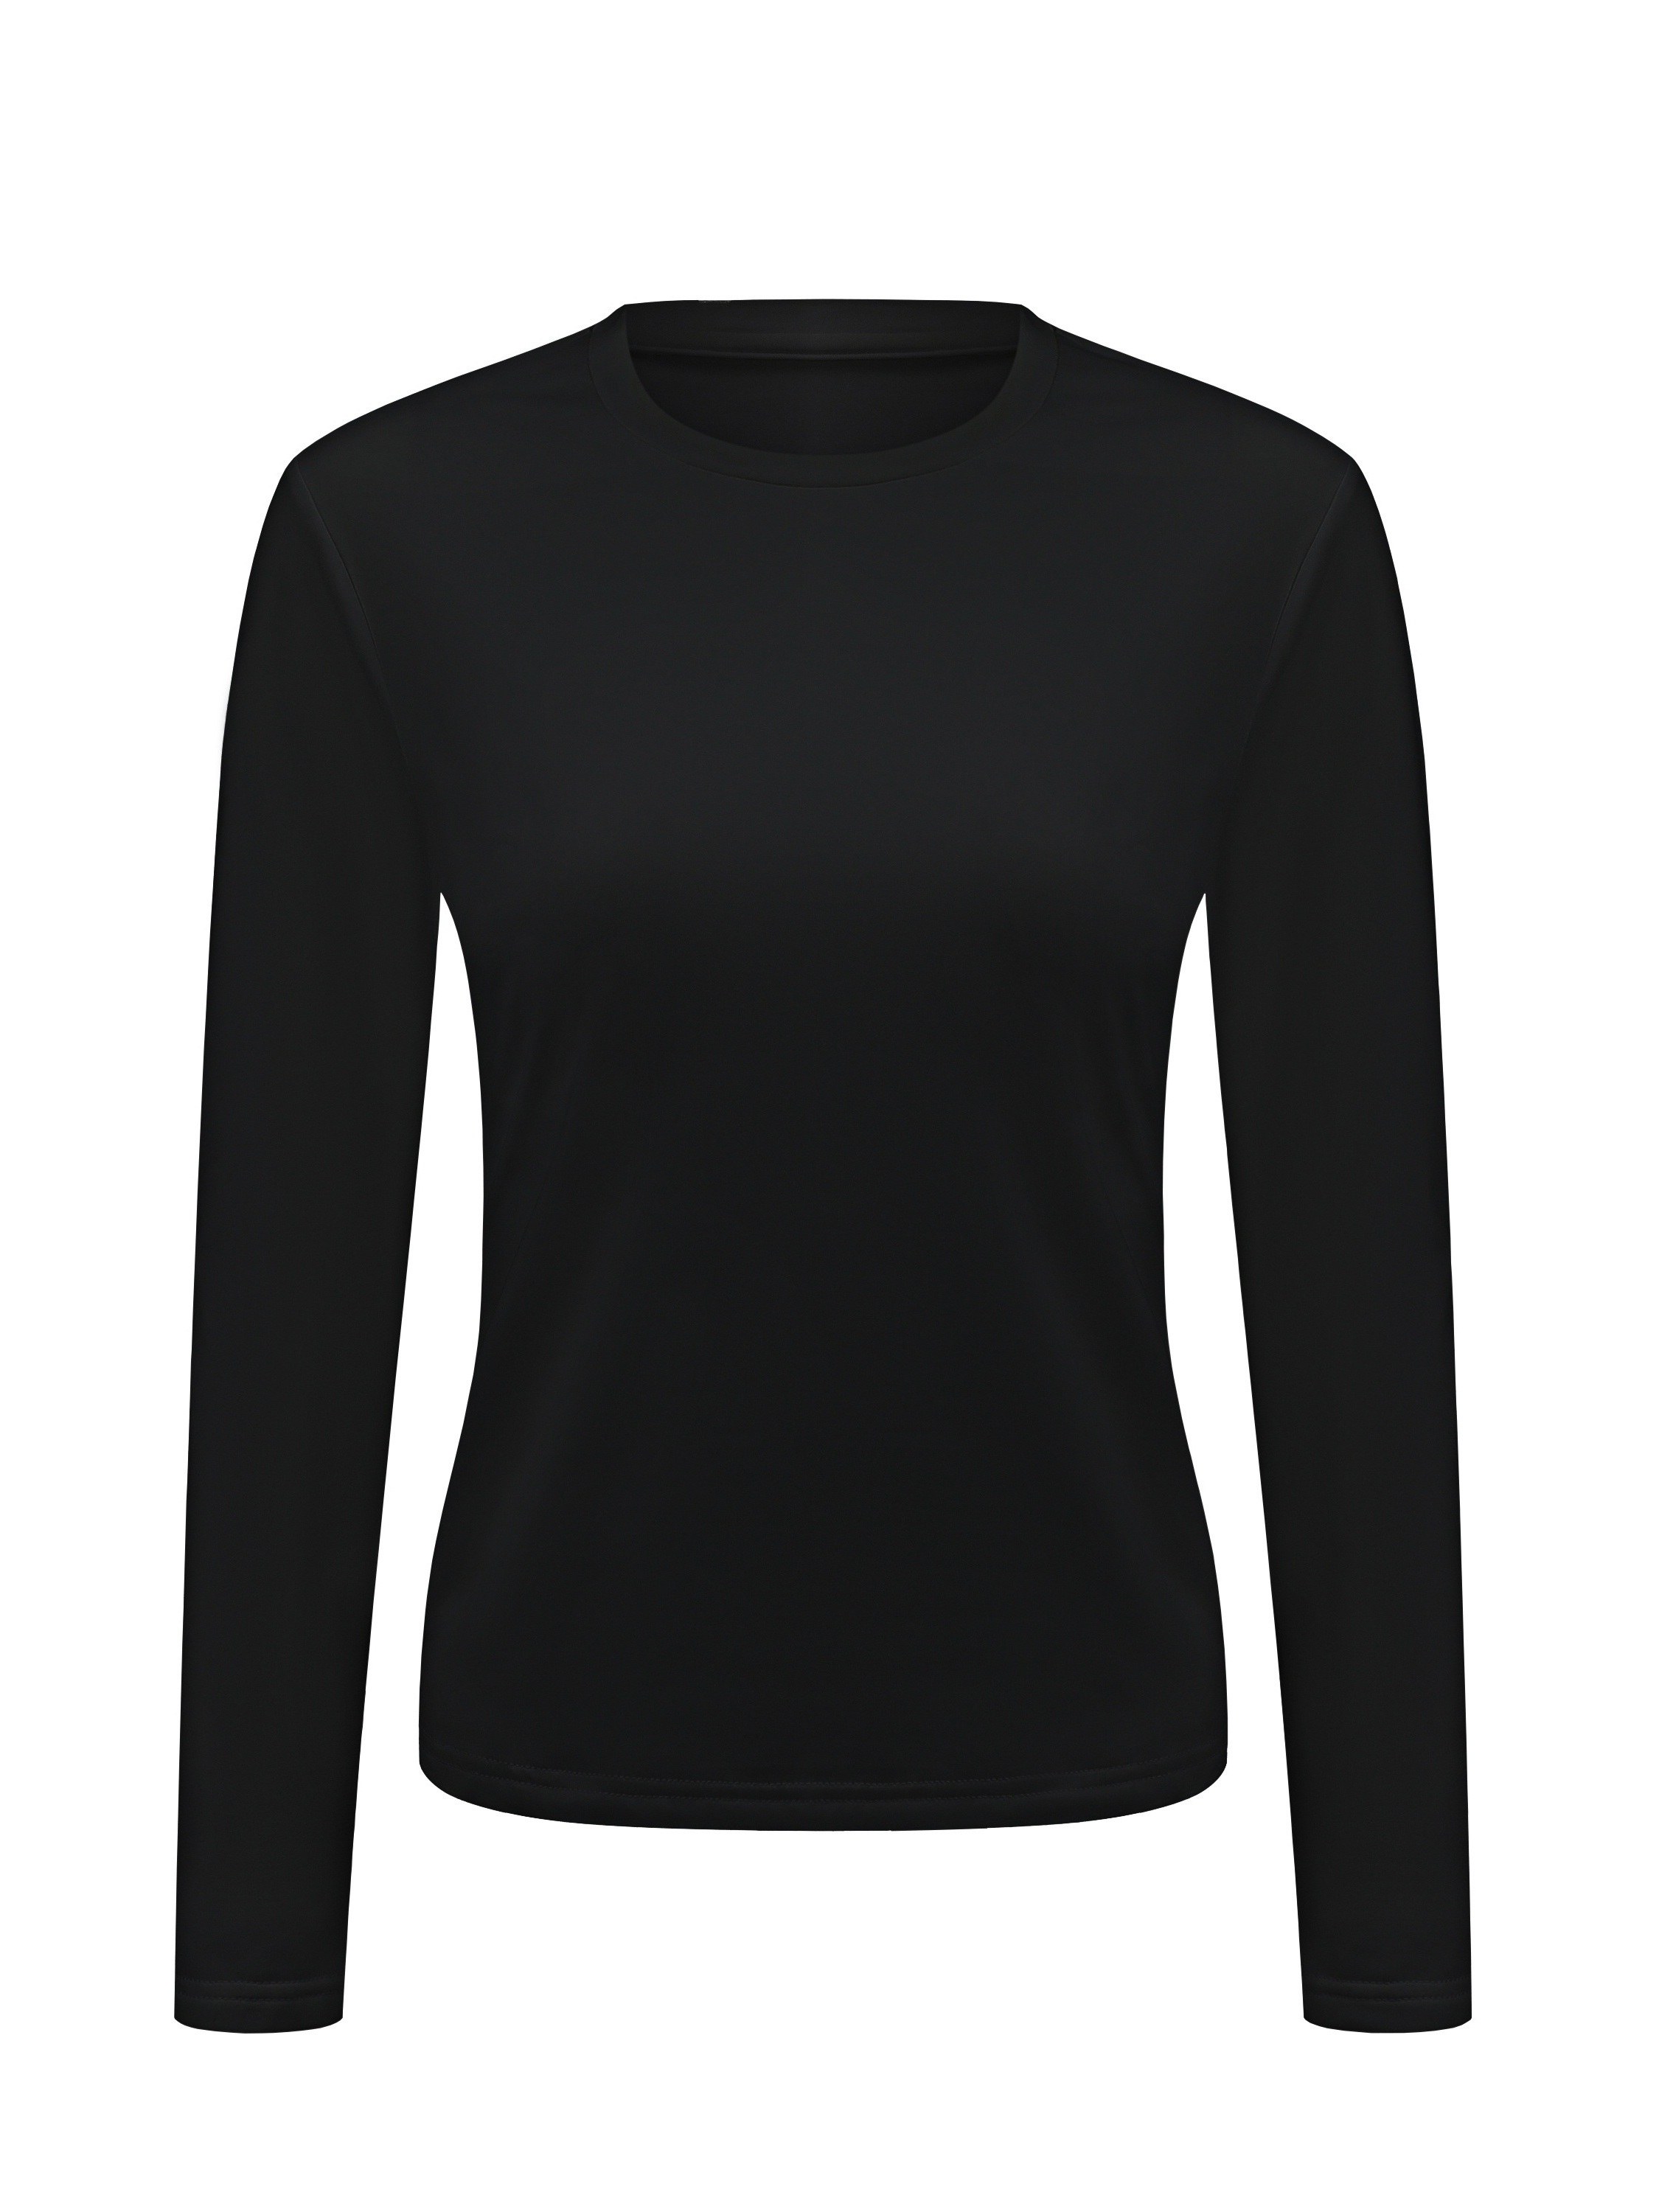 Super Soft Thermal Sports Sets Solid Color Warm Long Sleeve - Temu